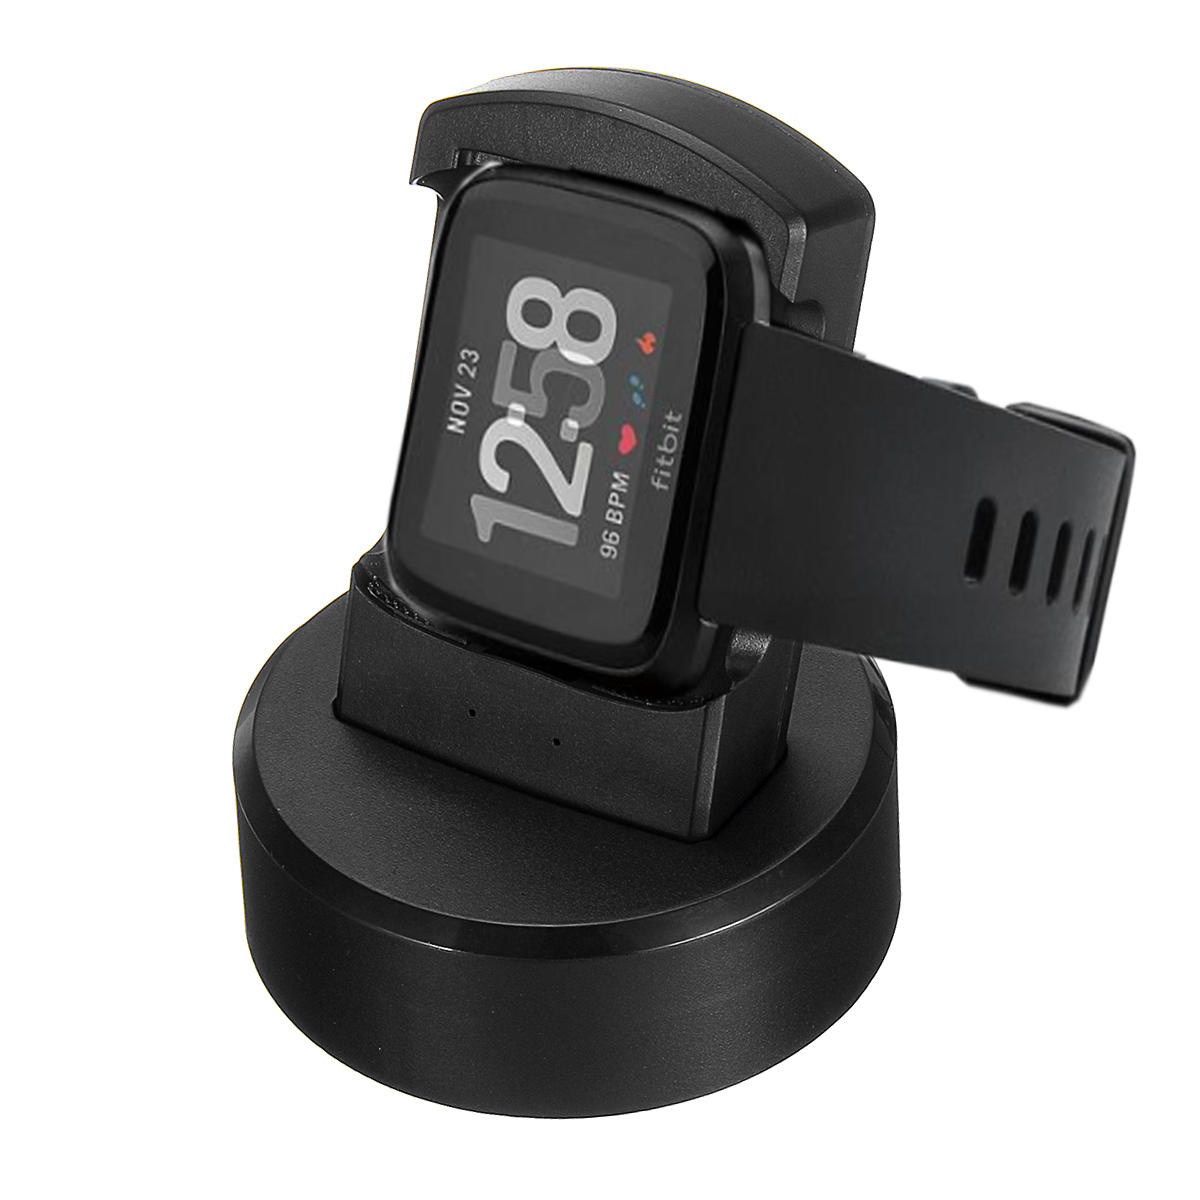 

Bakeey Smart Watch USB Charging Cable Power Charger Dock Cradle Stand For Fitbit Versa